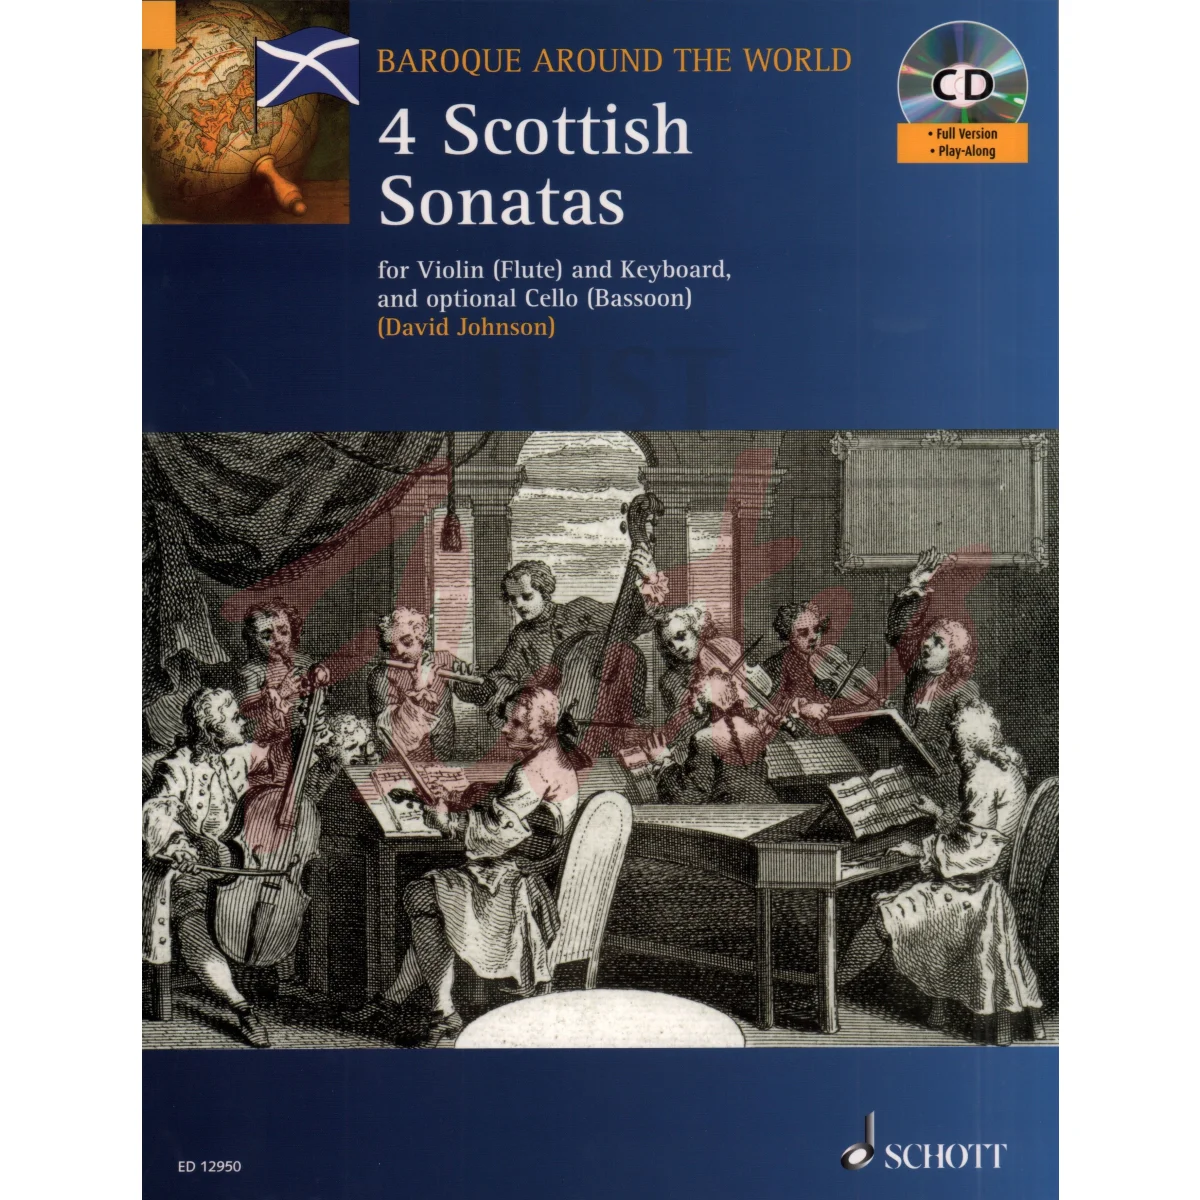 4 Scottish Sonatas for Flute/Violin and Keyboard, with optional Cello/Bassoon